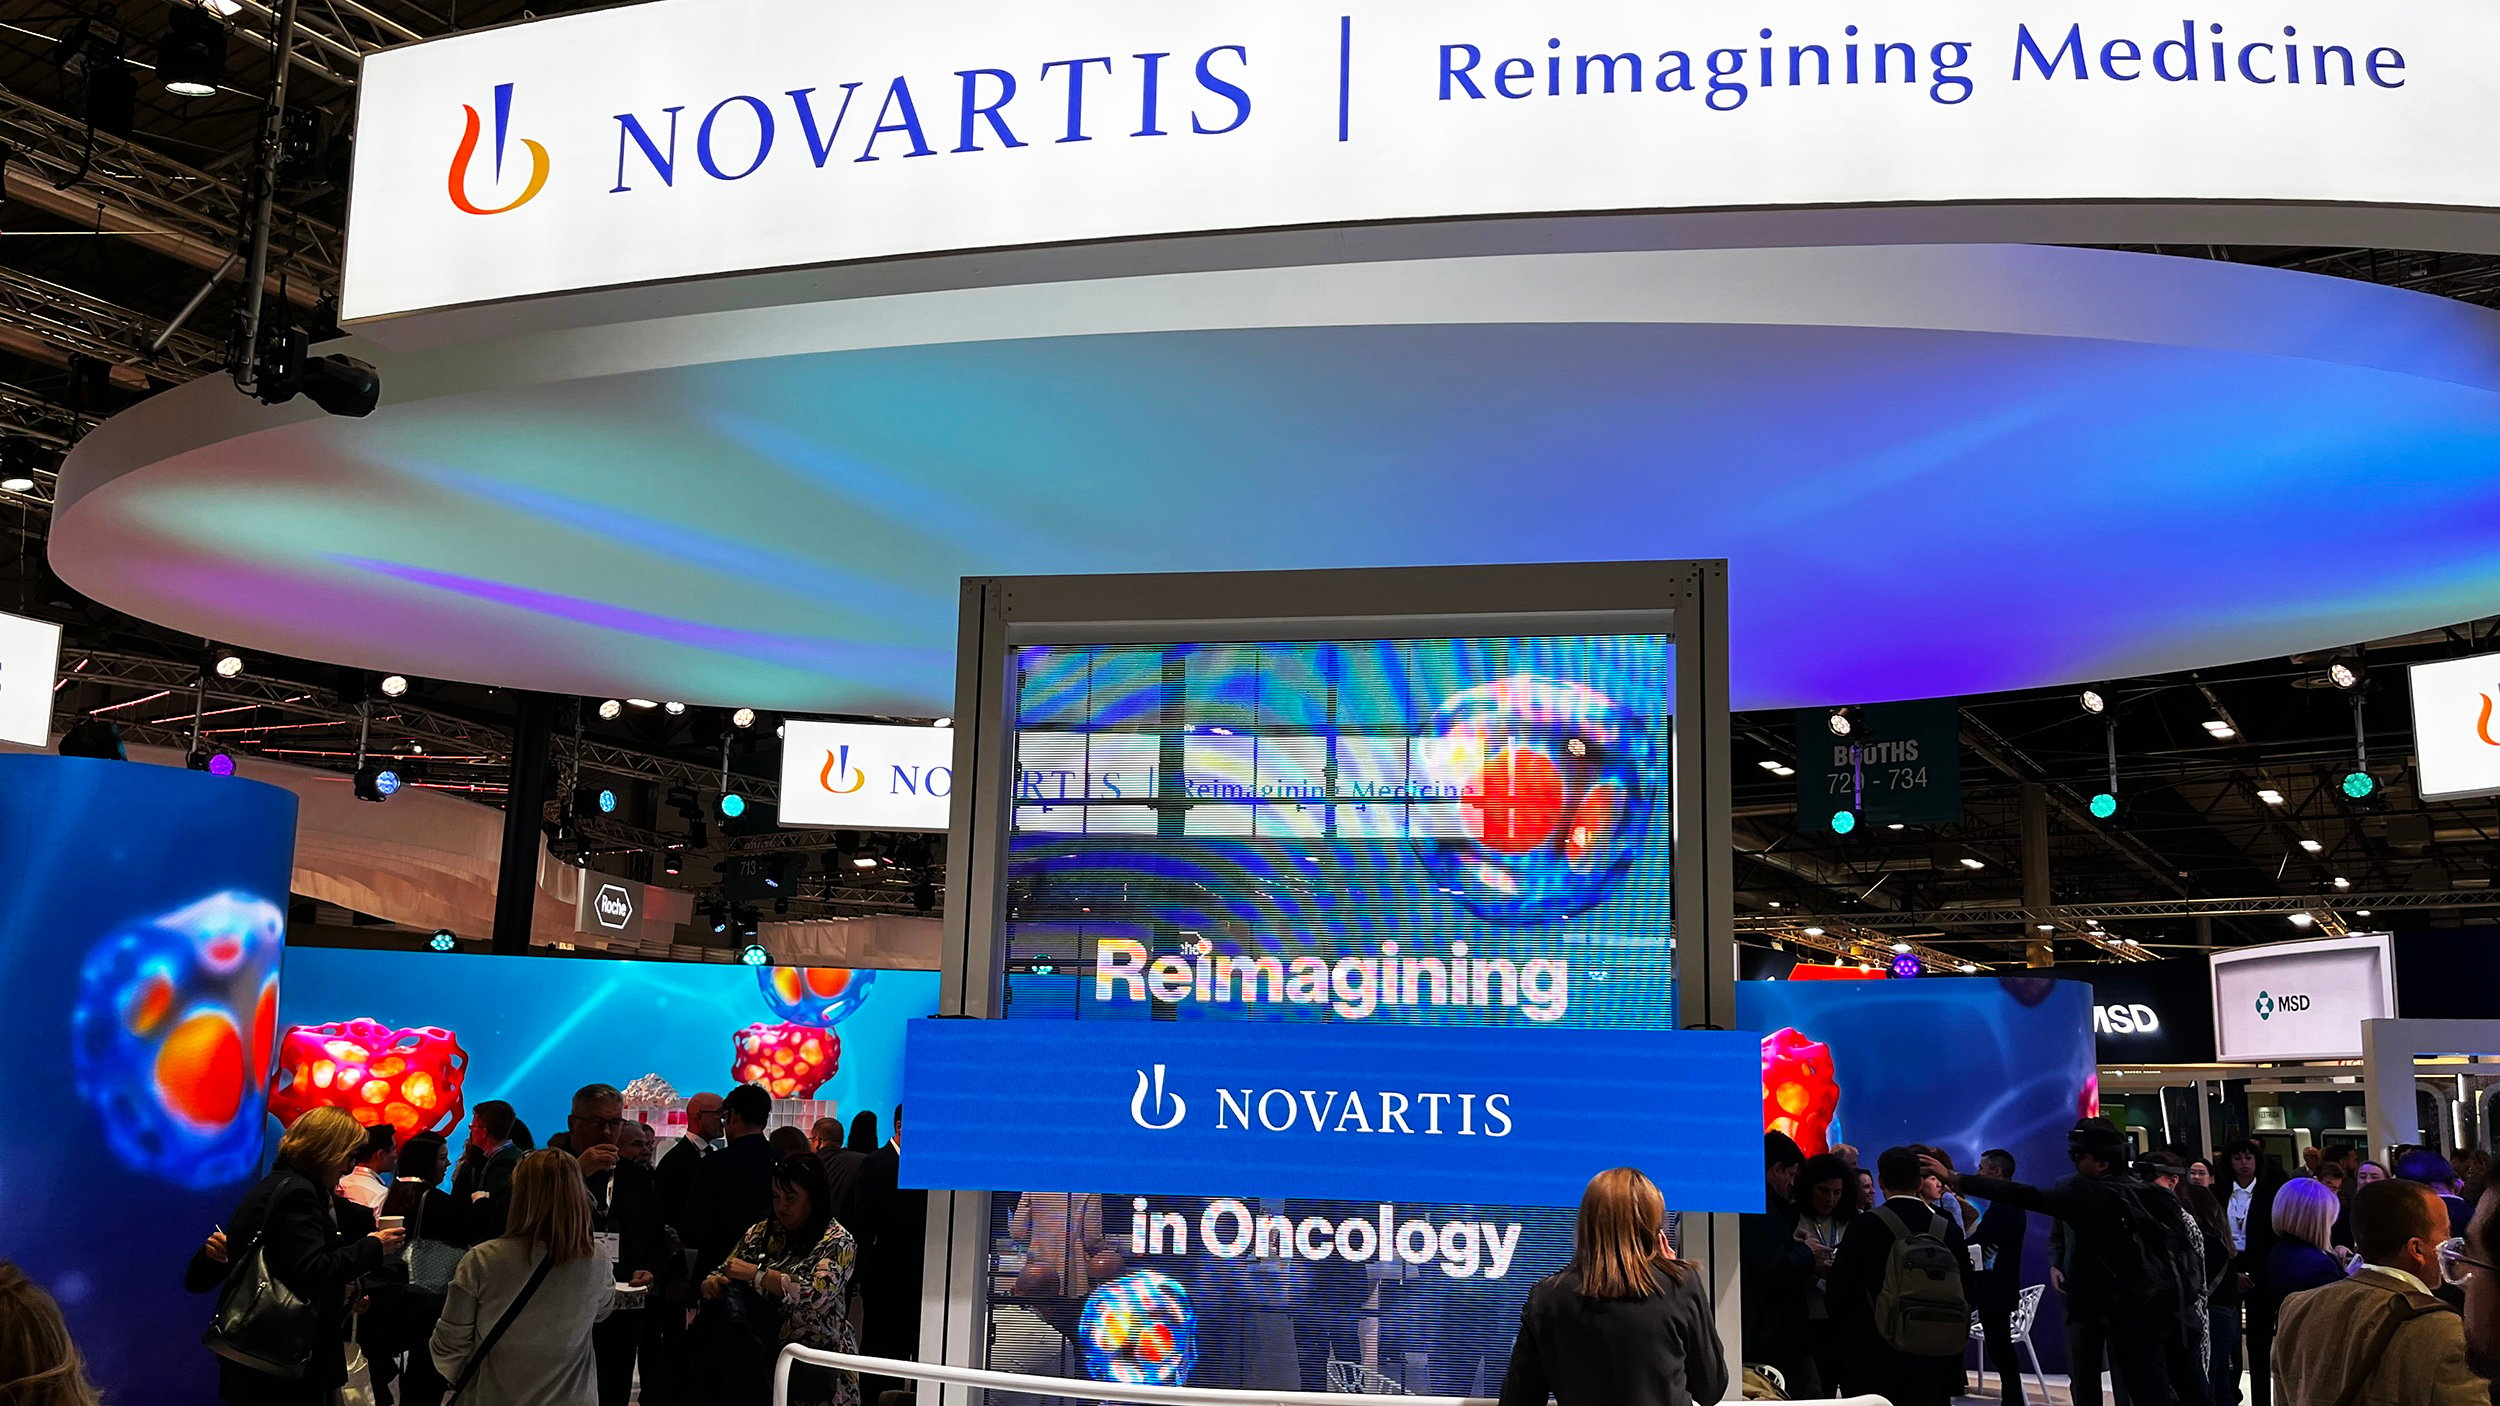 ESMO: As peers enter radiopharmaceuticals, Novartis says welcome to the party